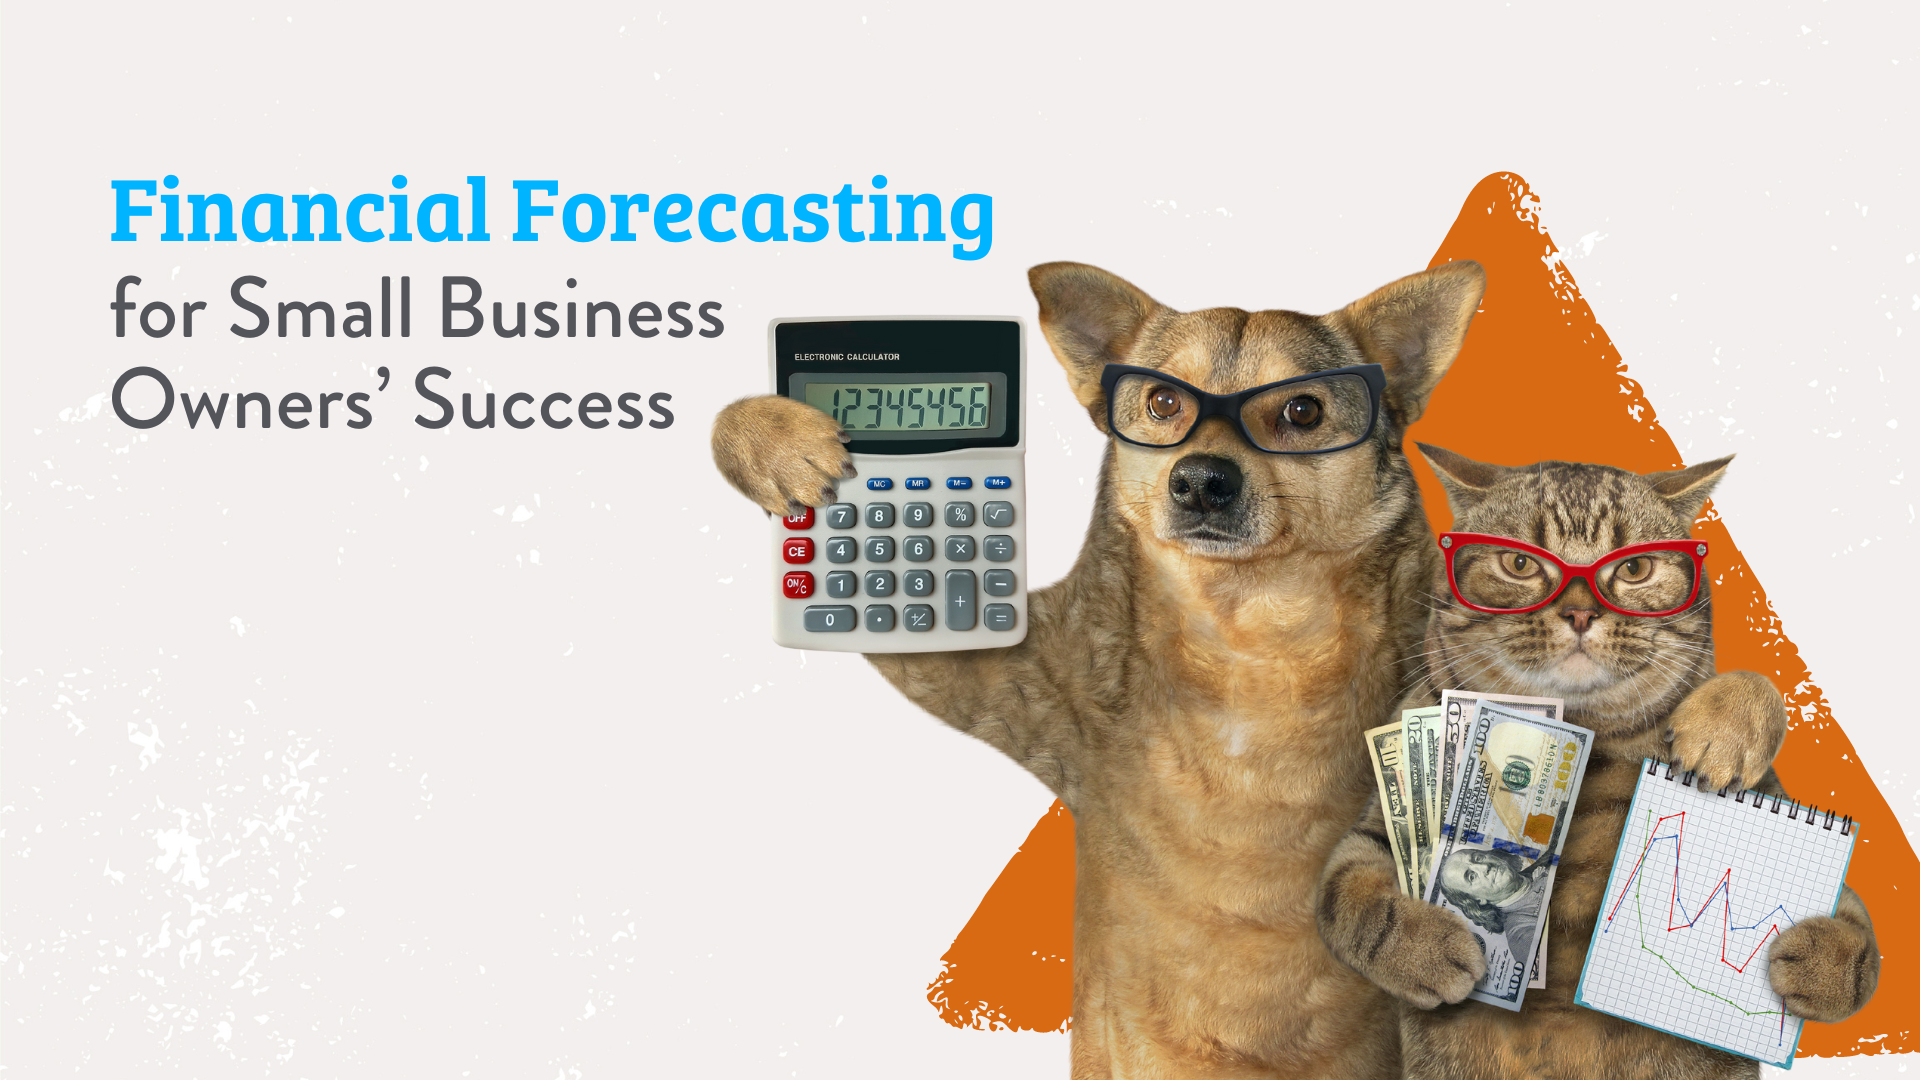 Financial Forecasting for Small Business Owners’ Success